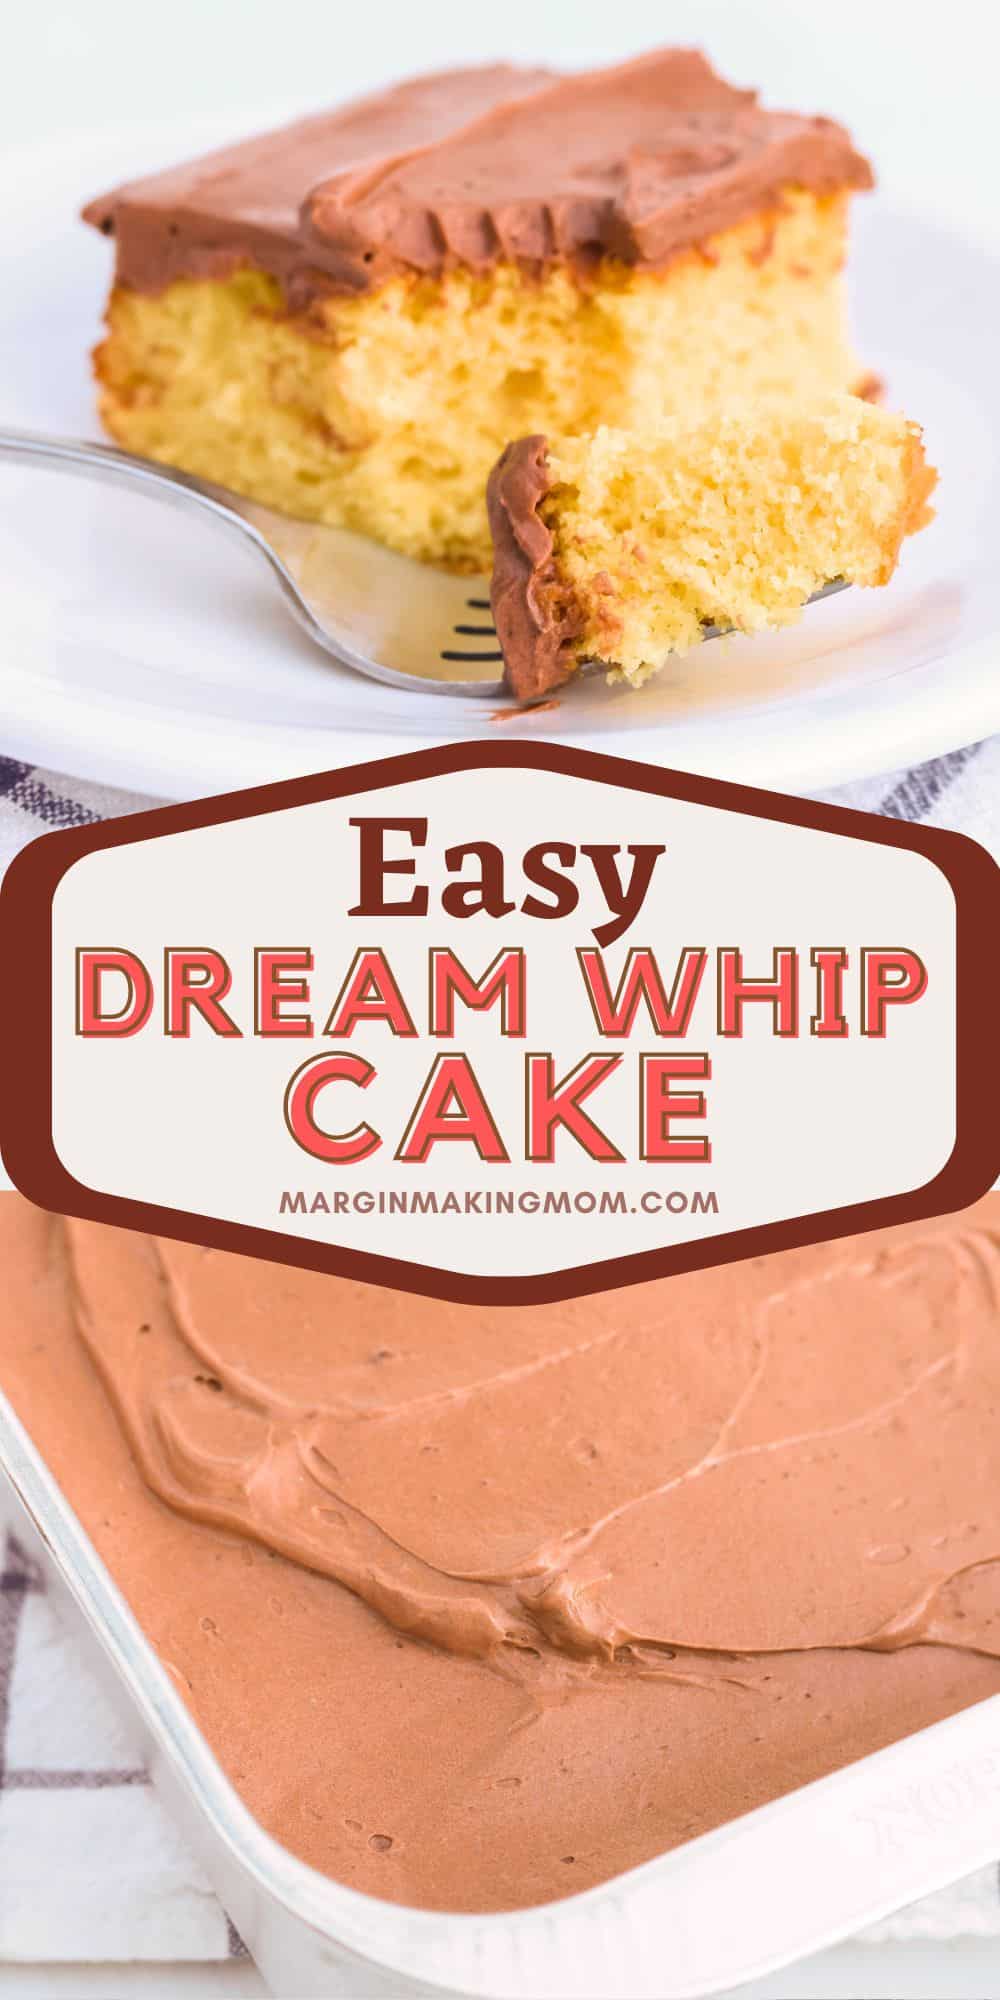 two photos of Dream Whip cake--one shows a piece of cake with a bite taken out of it, the other shows the surface of the frosted cake.